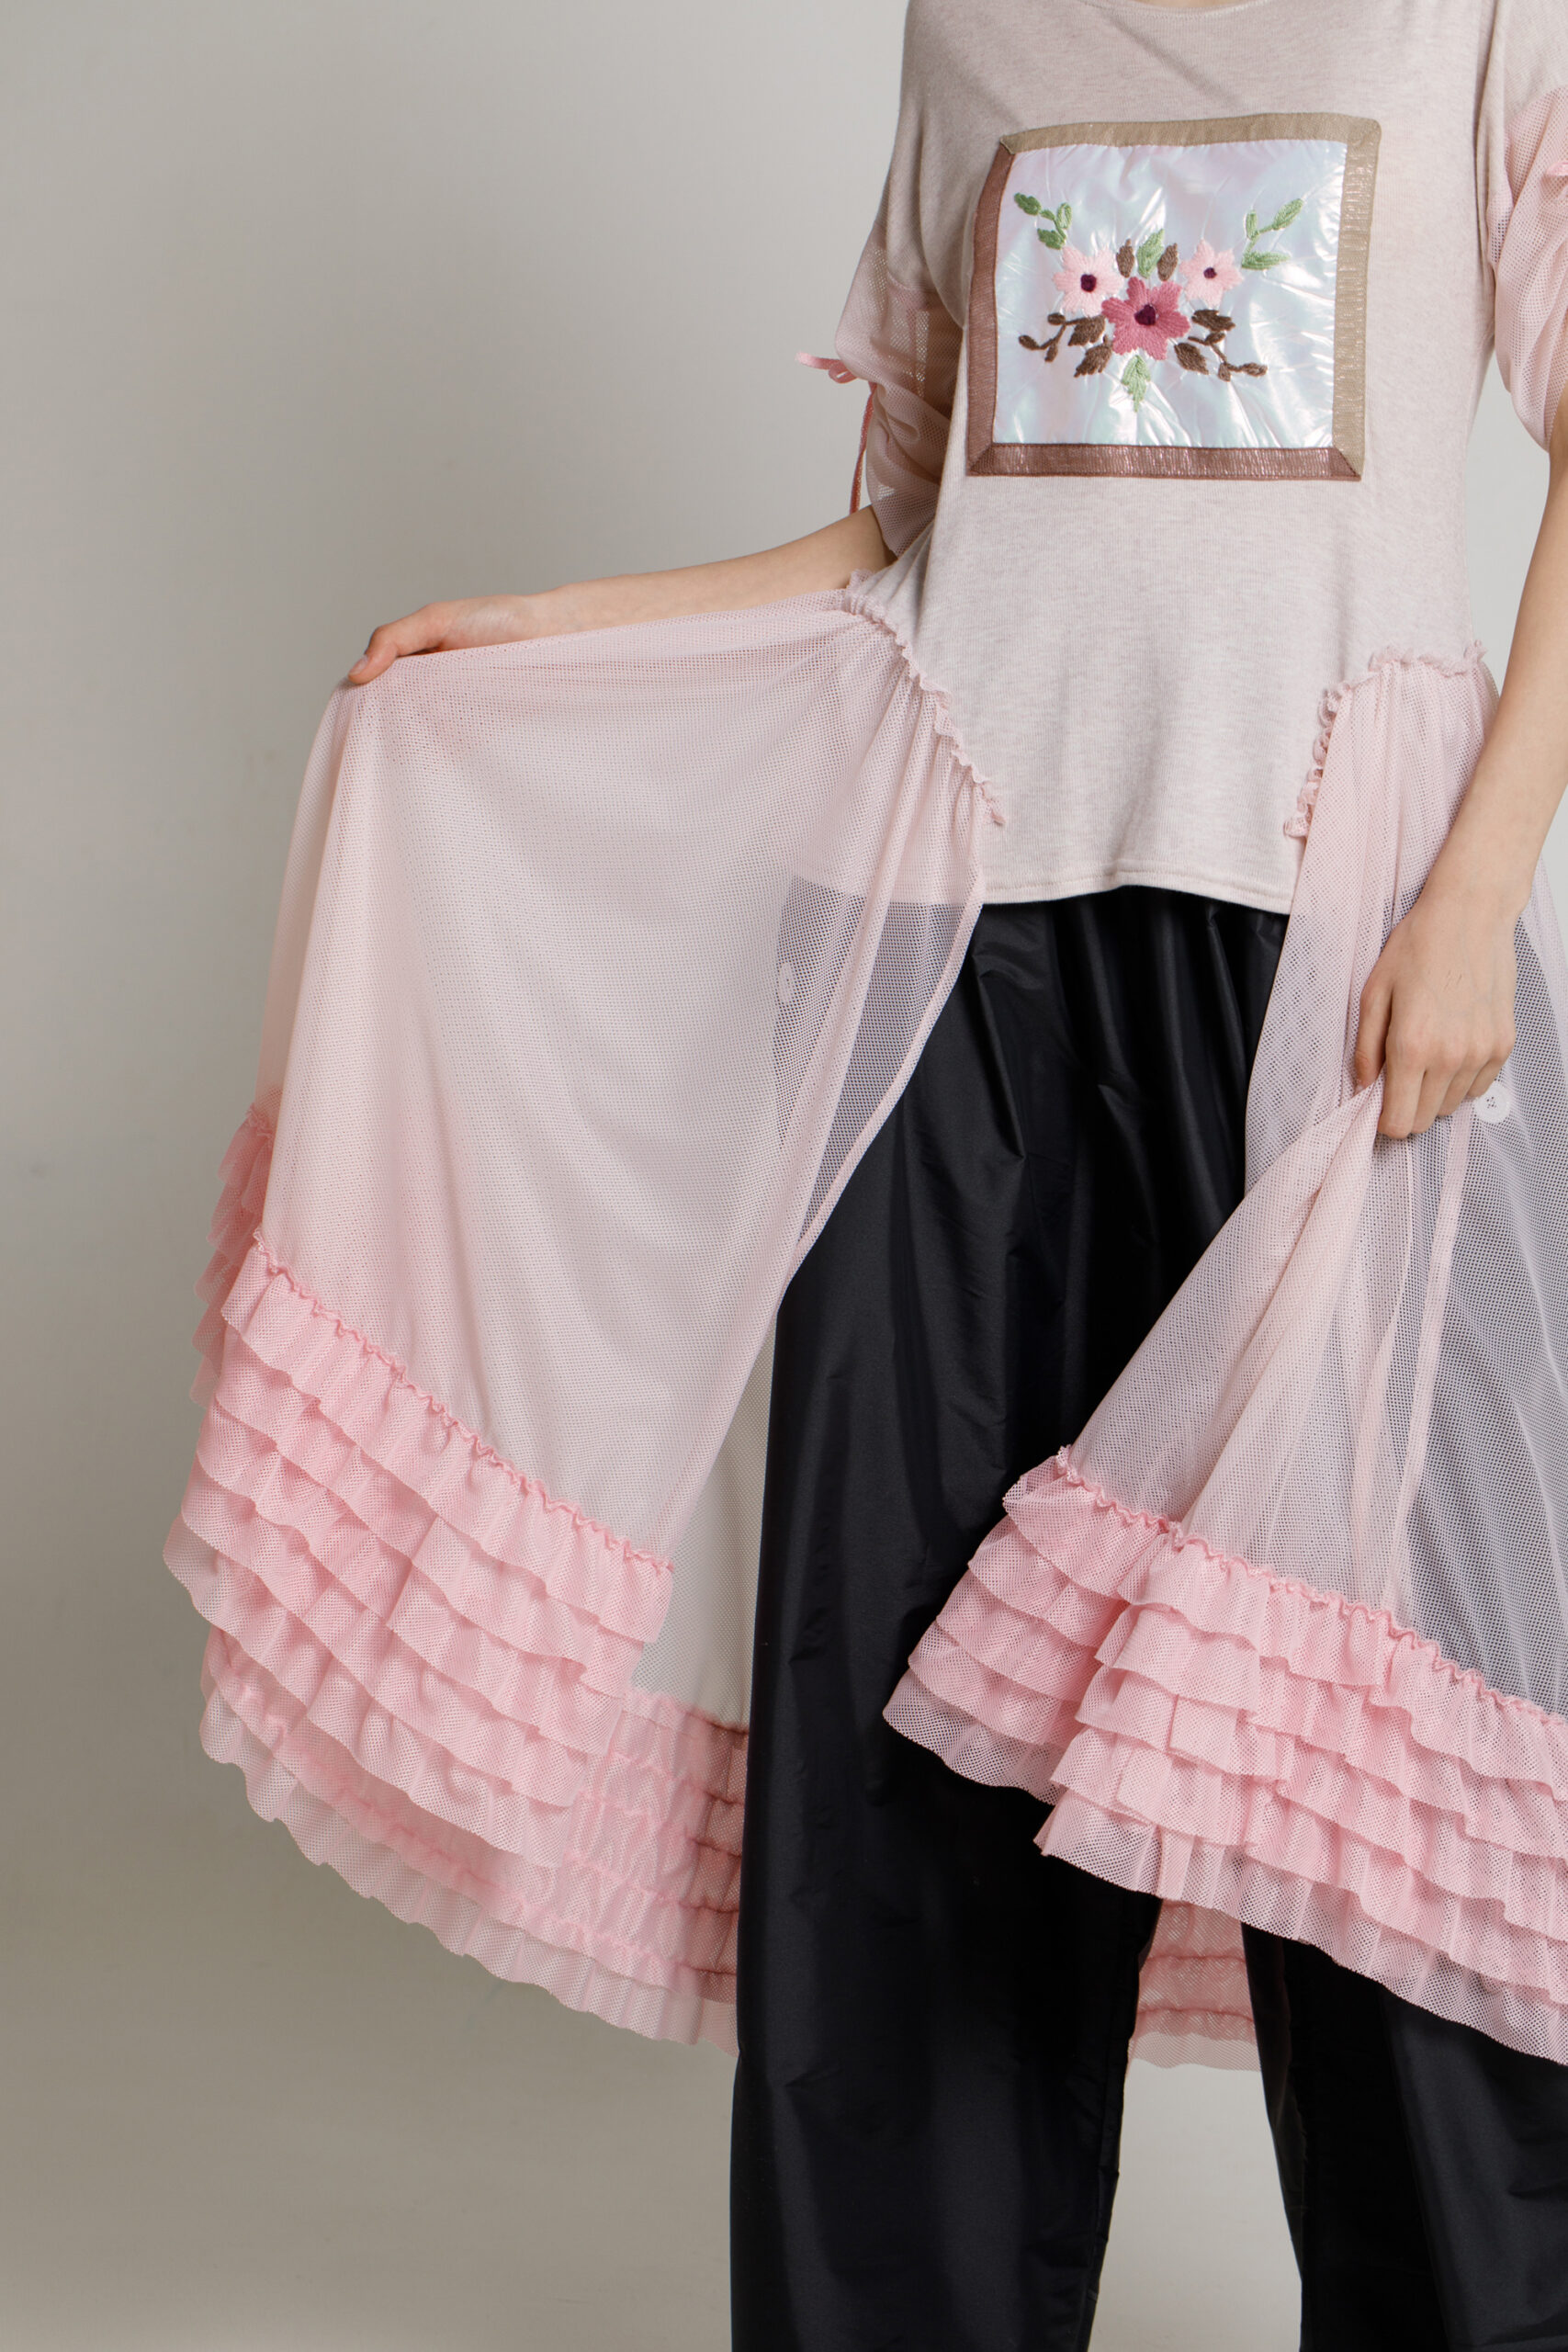 NAVY casual pink blouse with tulle train and ruffles. Natural fabrics, original design, handmade embroidery